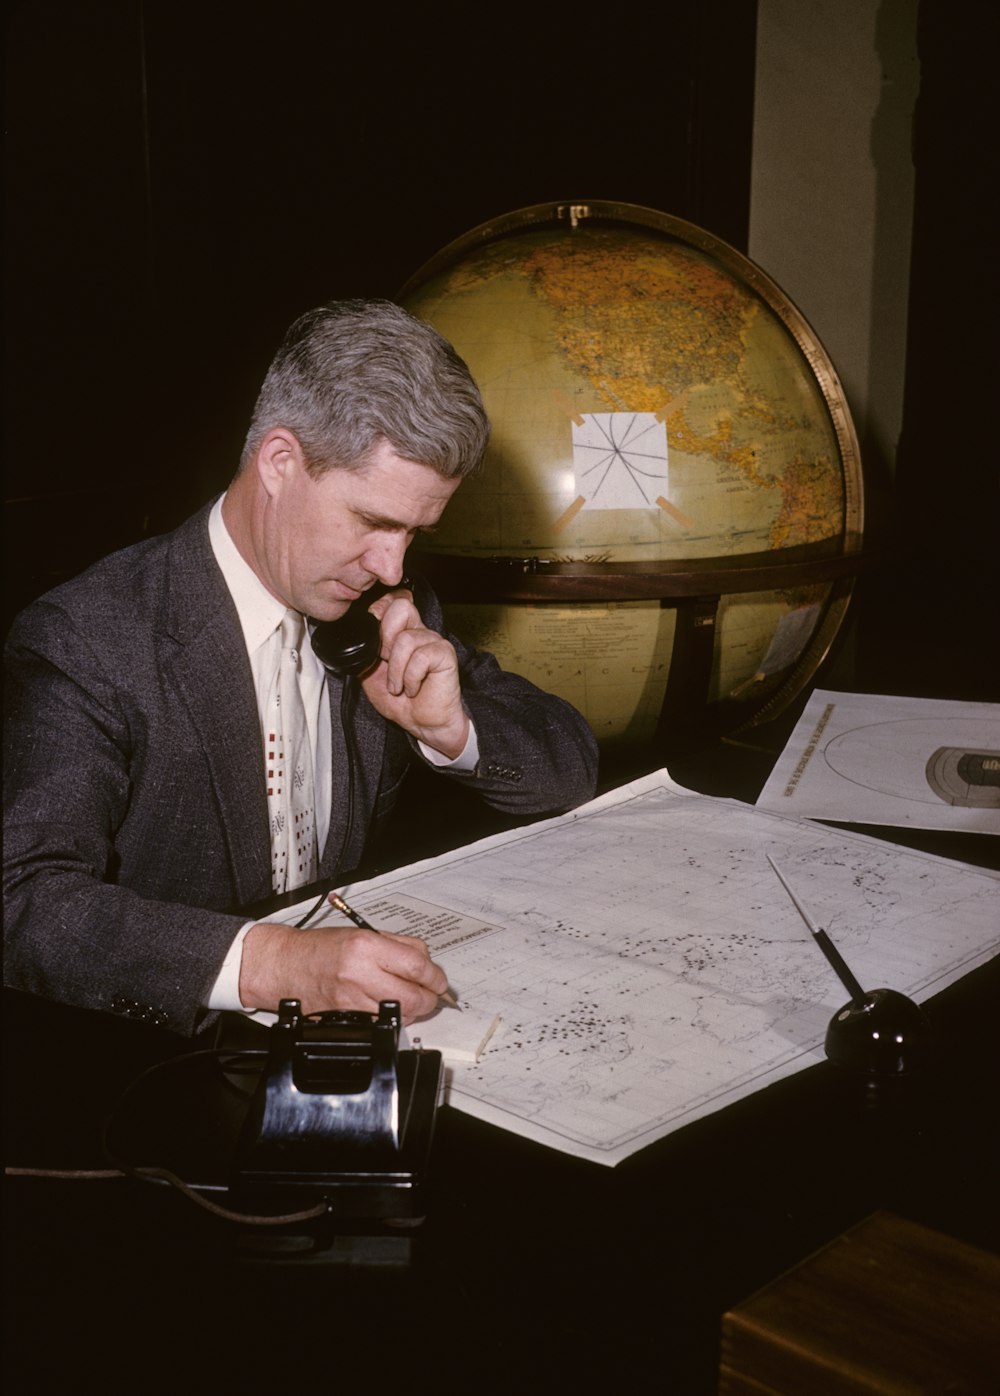 man in black suit jacket writing on white paper